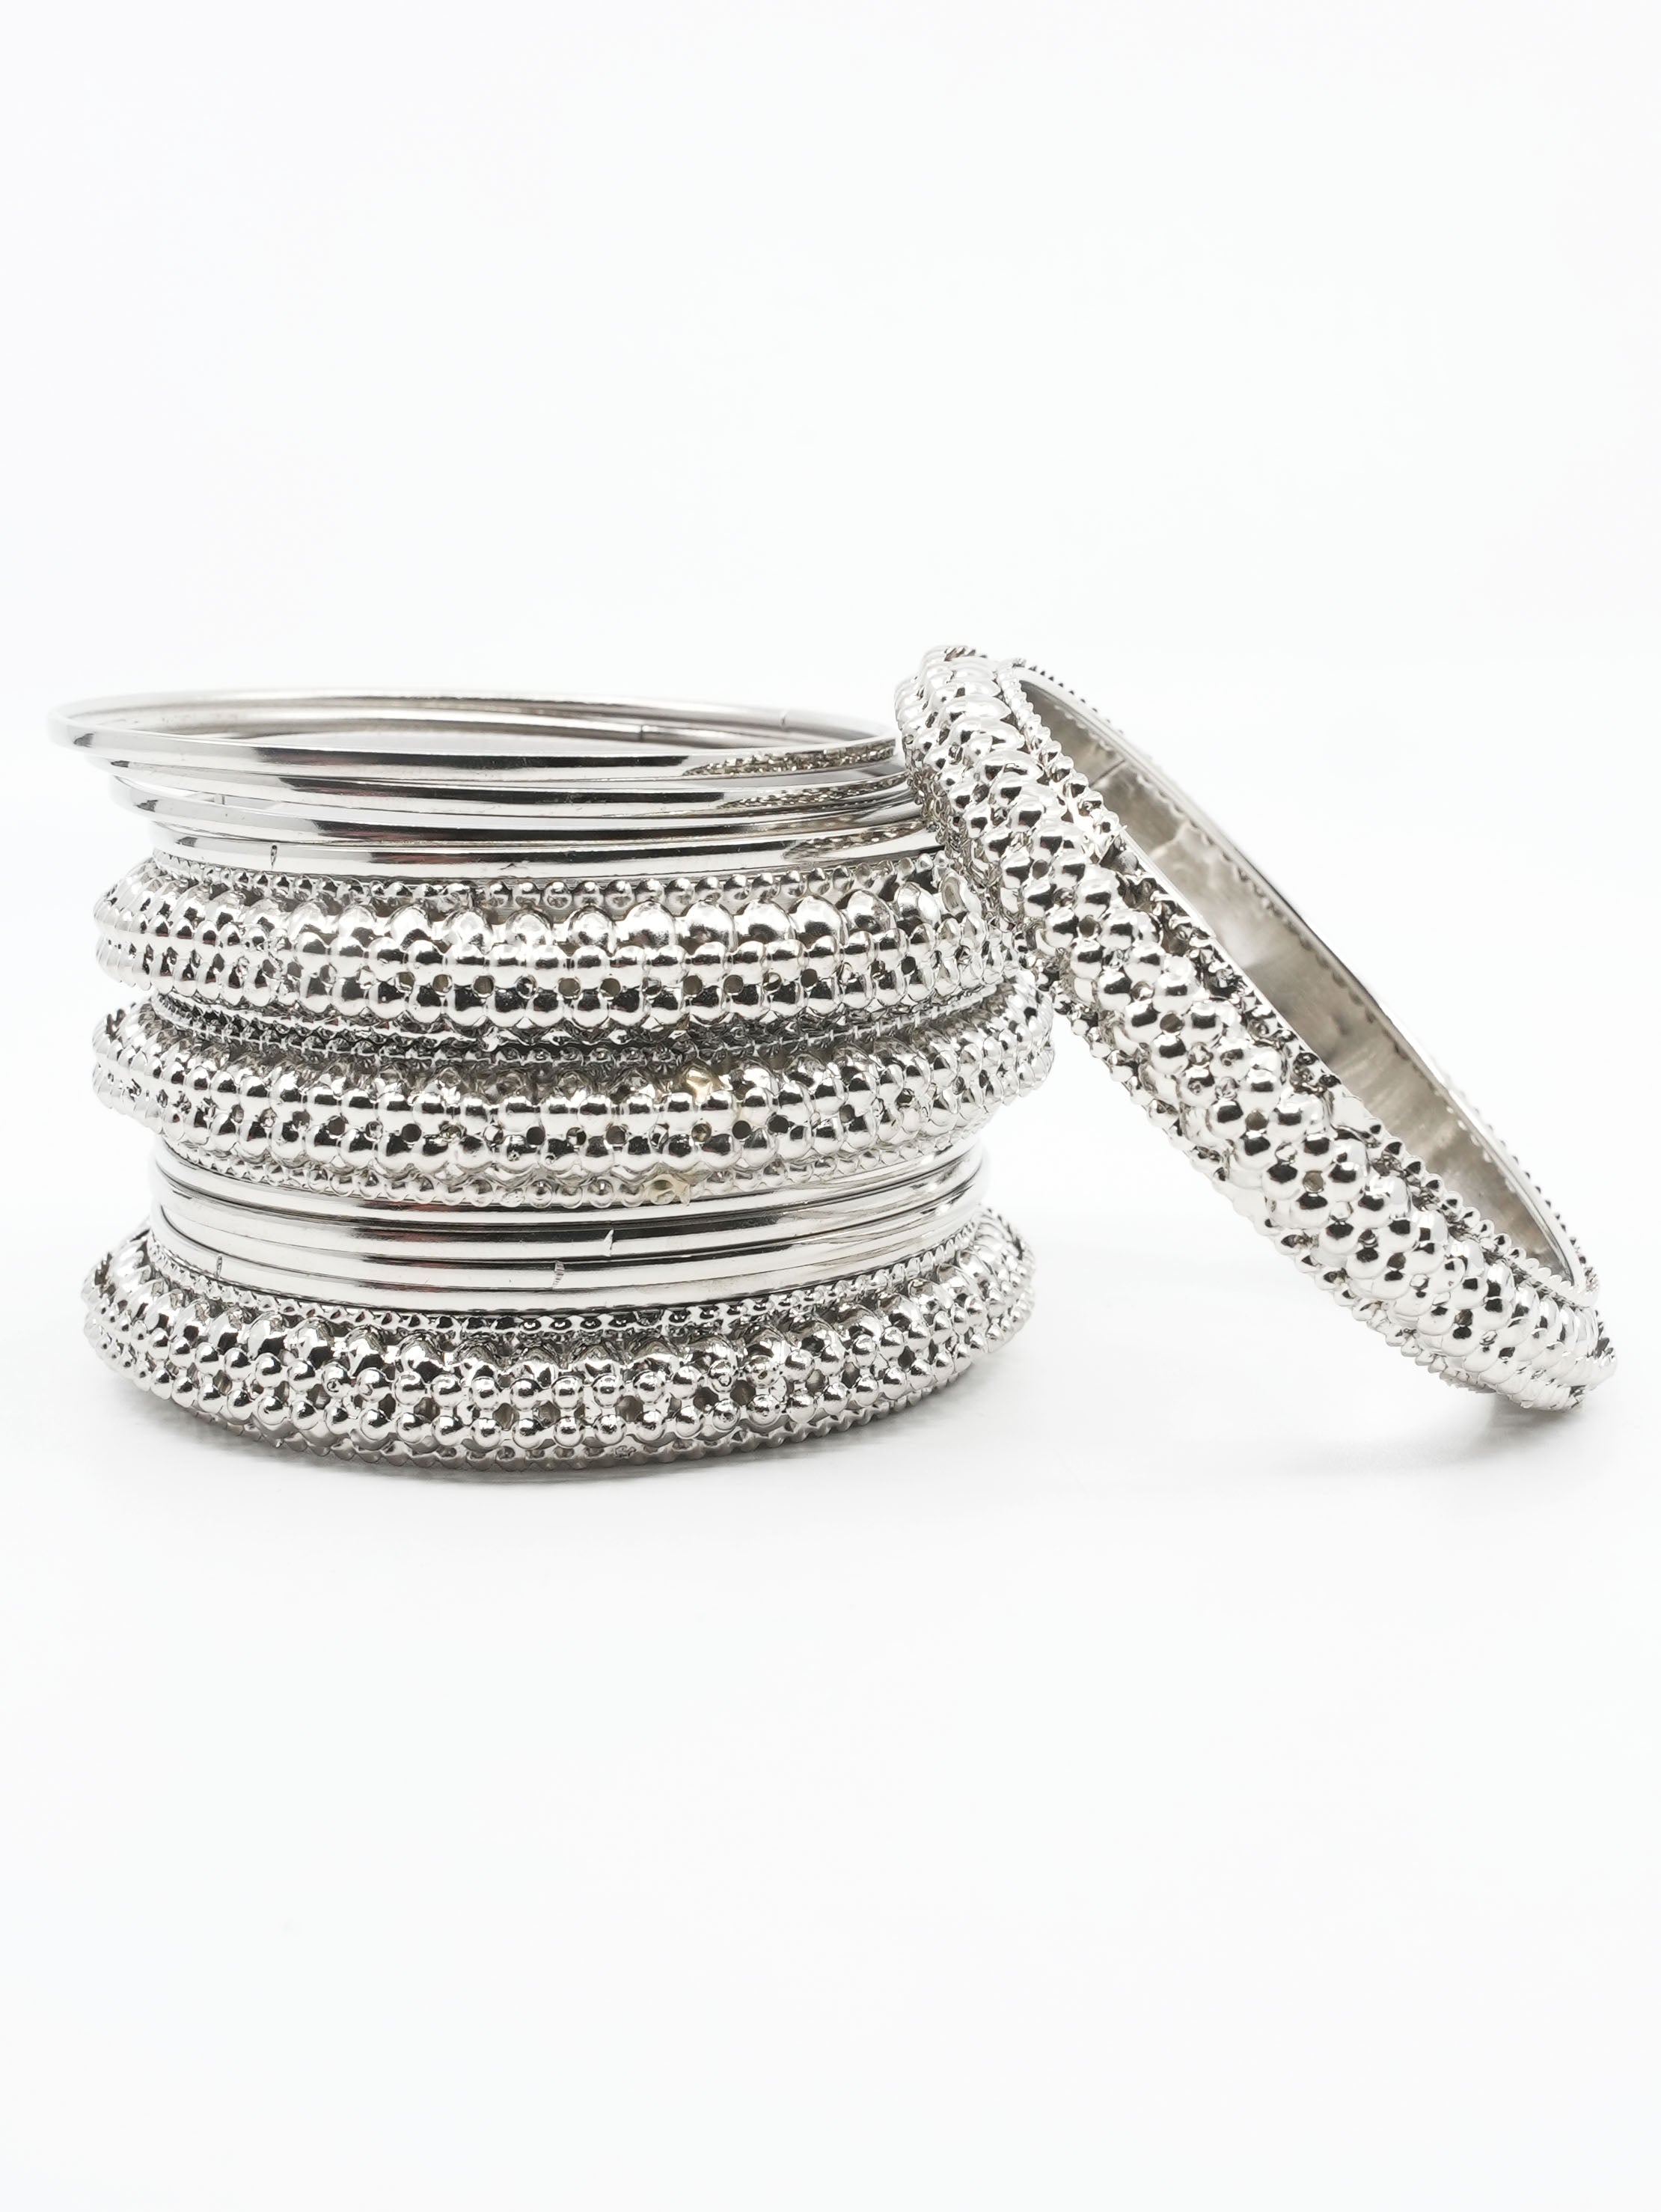 Fancy Silver Plated Bangles Set of 12 bangles 11434K